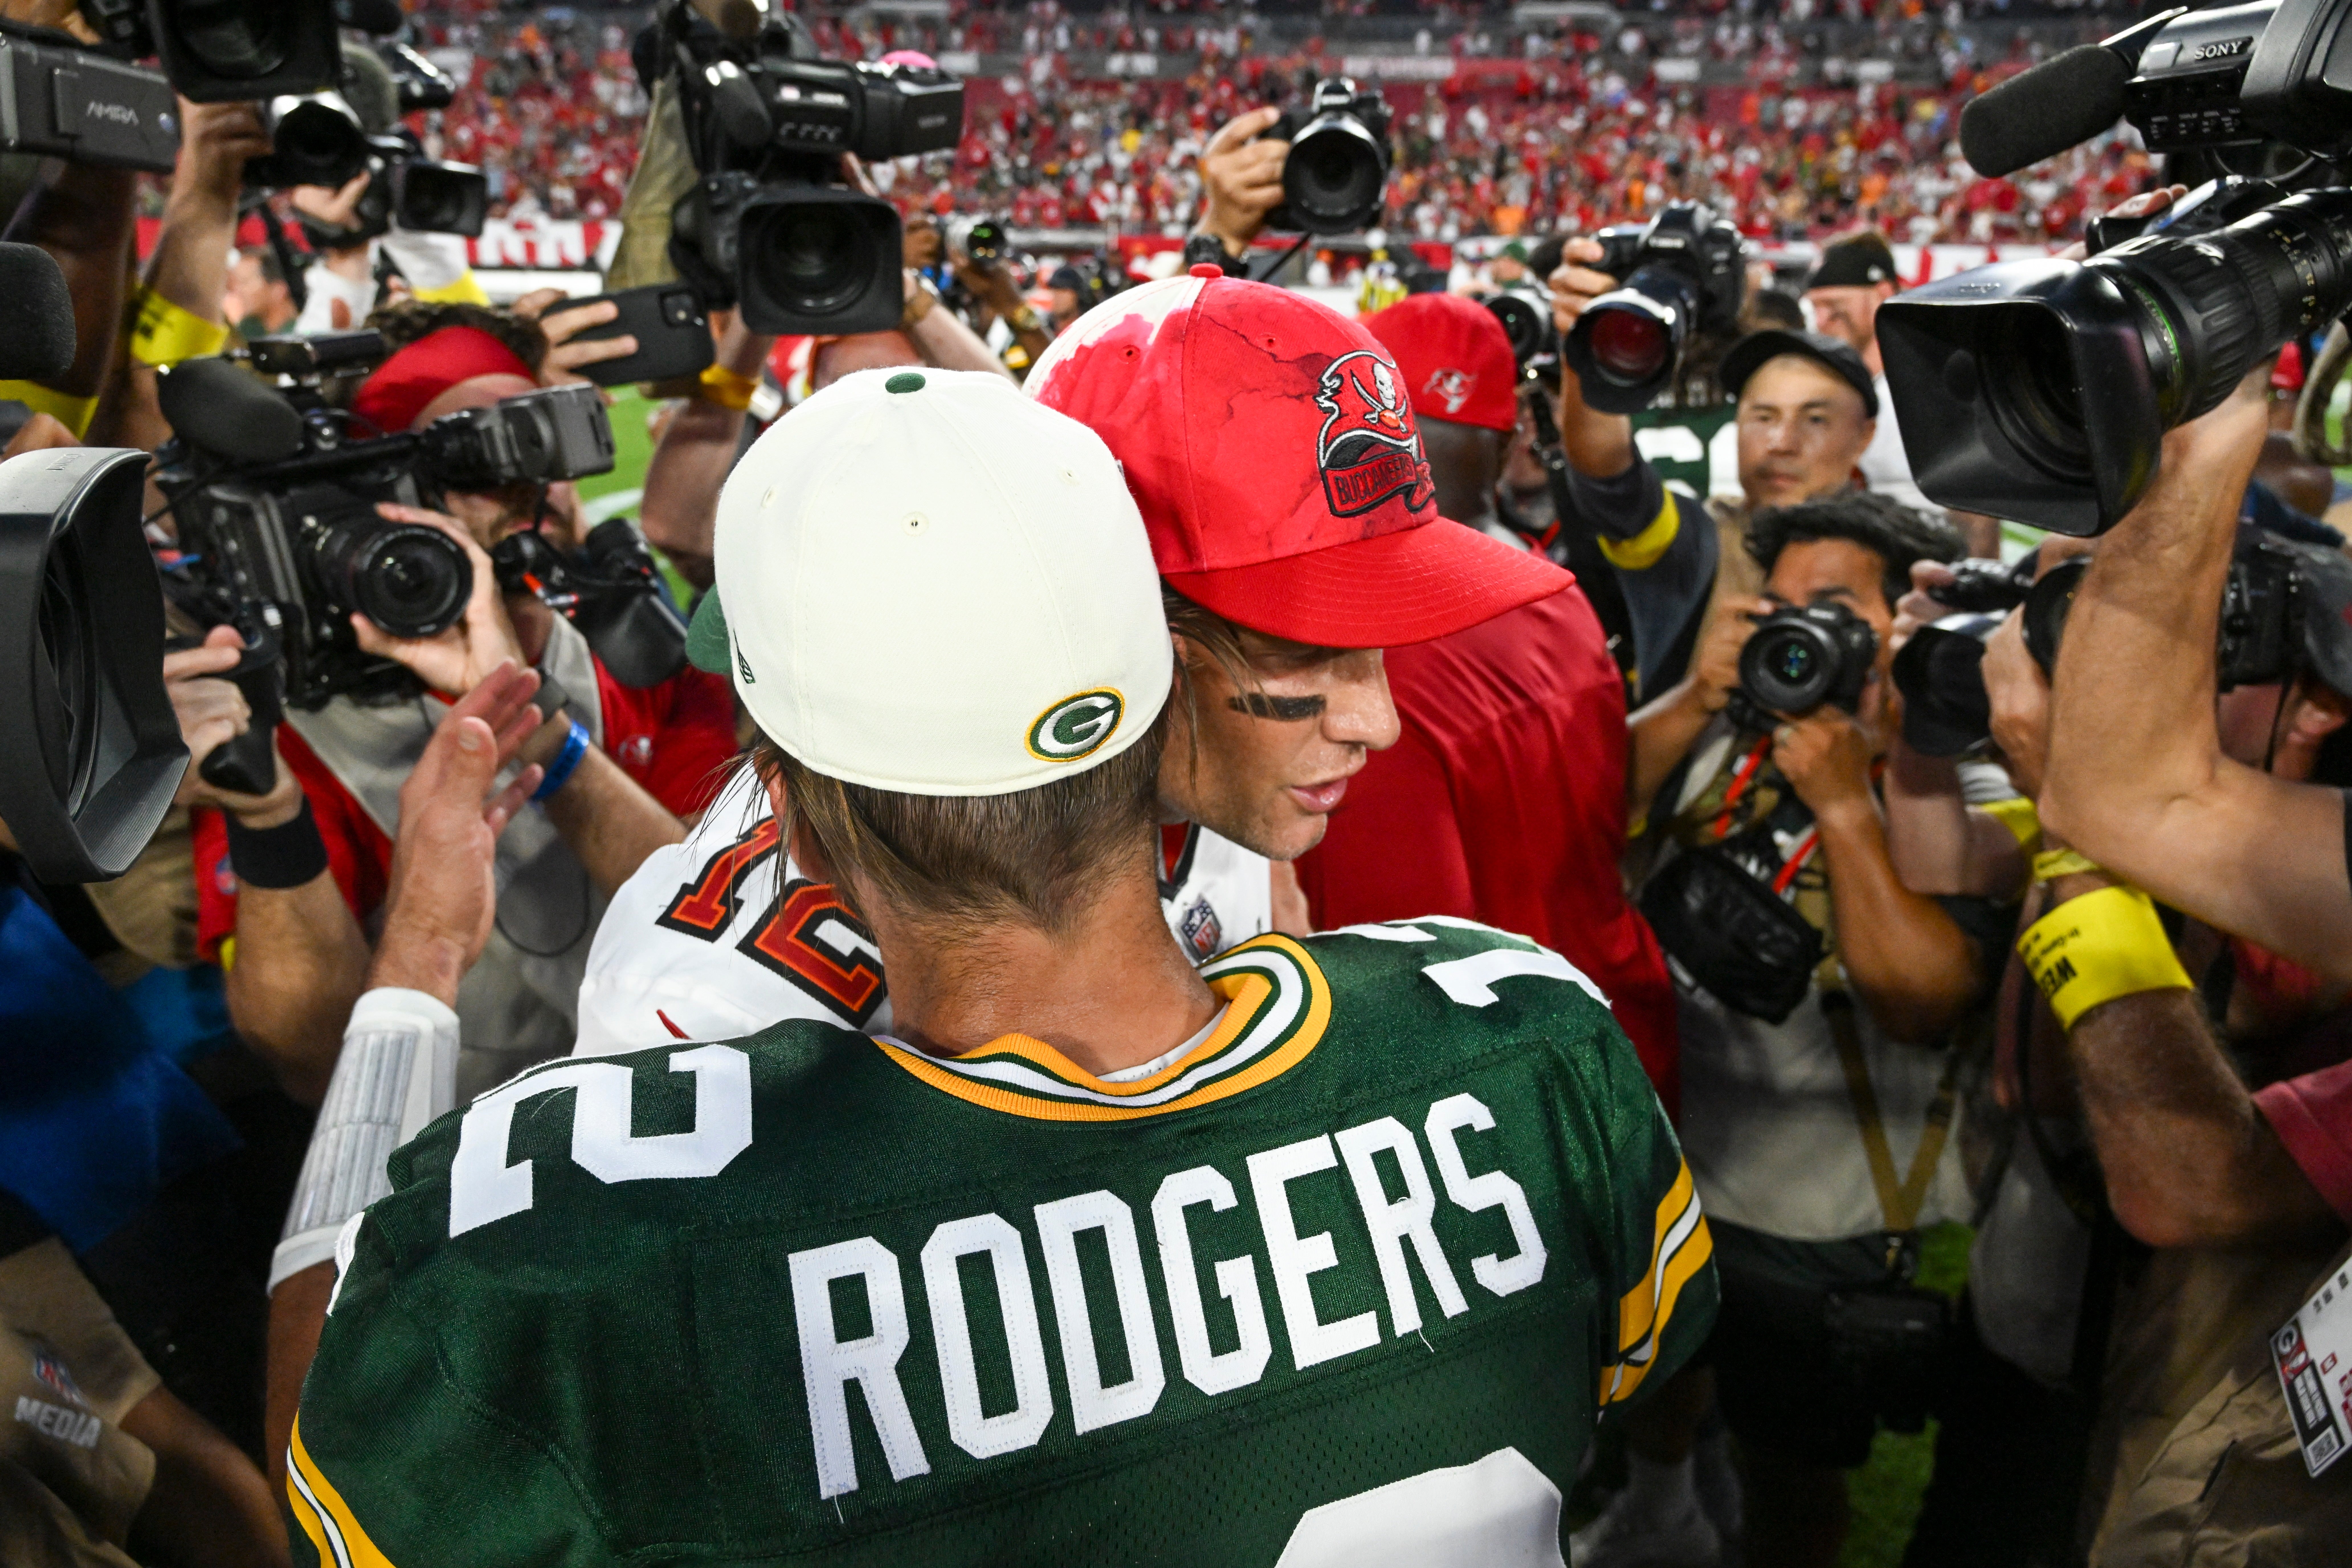 Aaron Rodgers edges Tom Brady as Green Bay Packers hold off Tampa